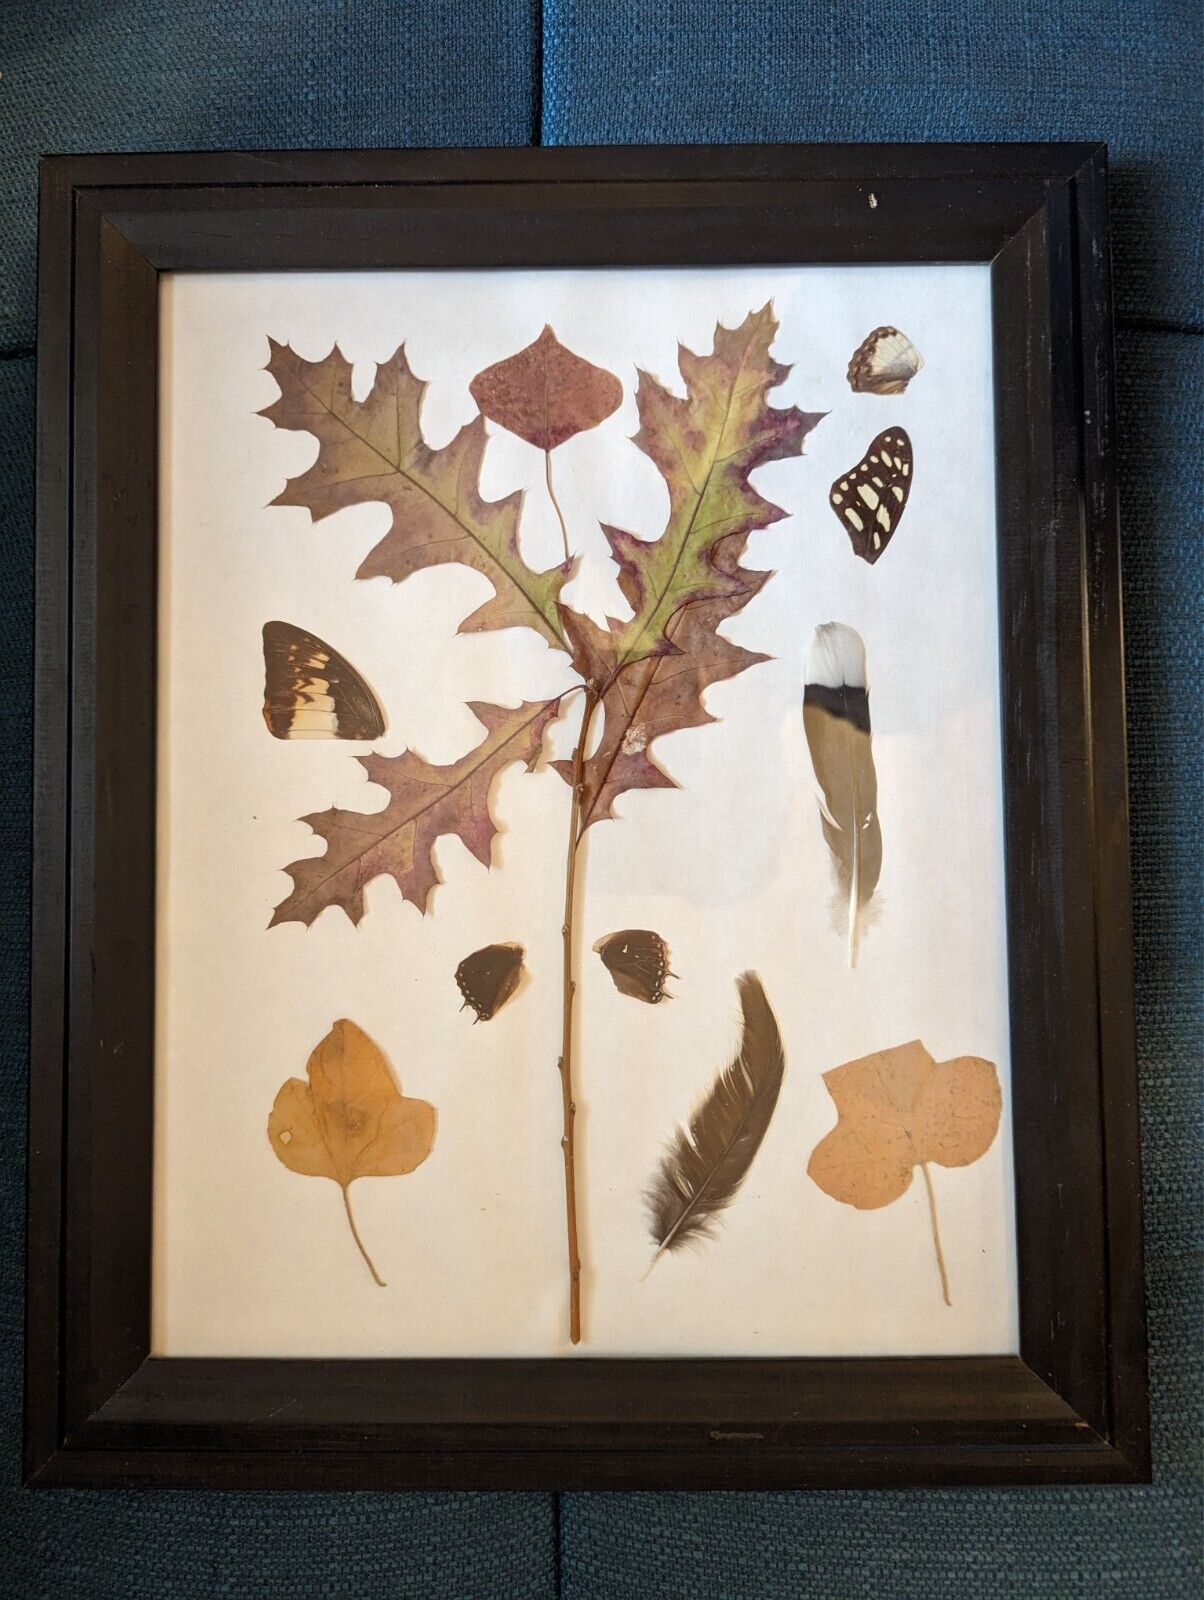 Antique Flower Decor Picture #2 Mixture of Butterfly Wings, Bird feathers, Leafs